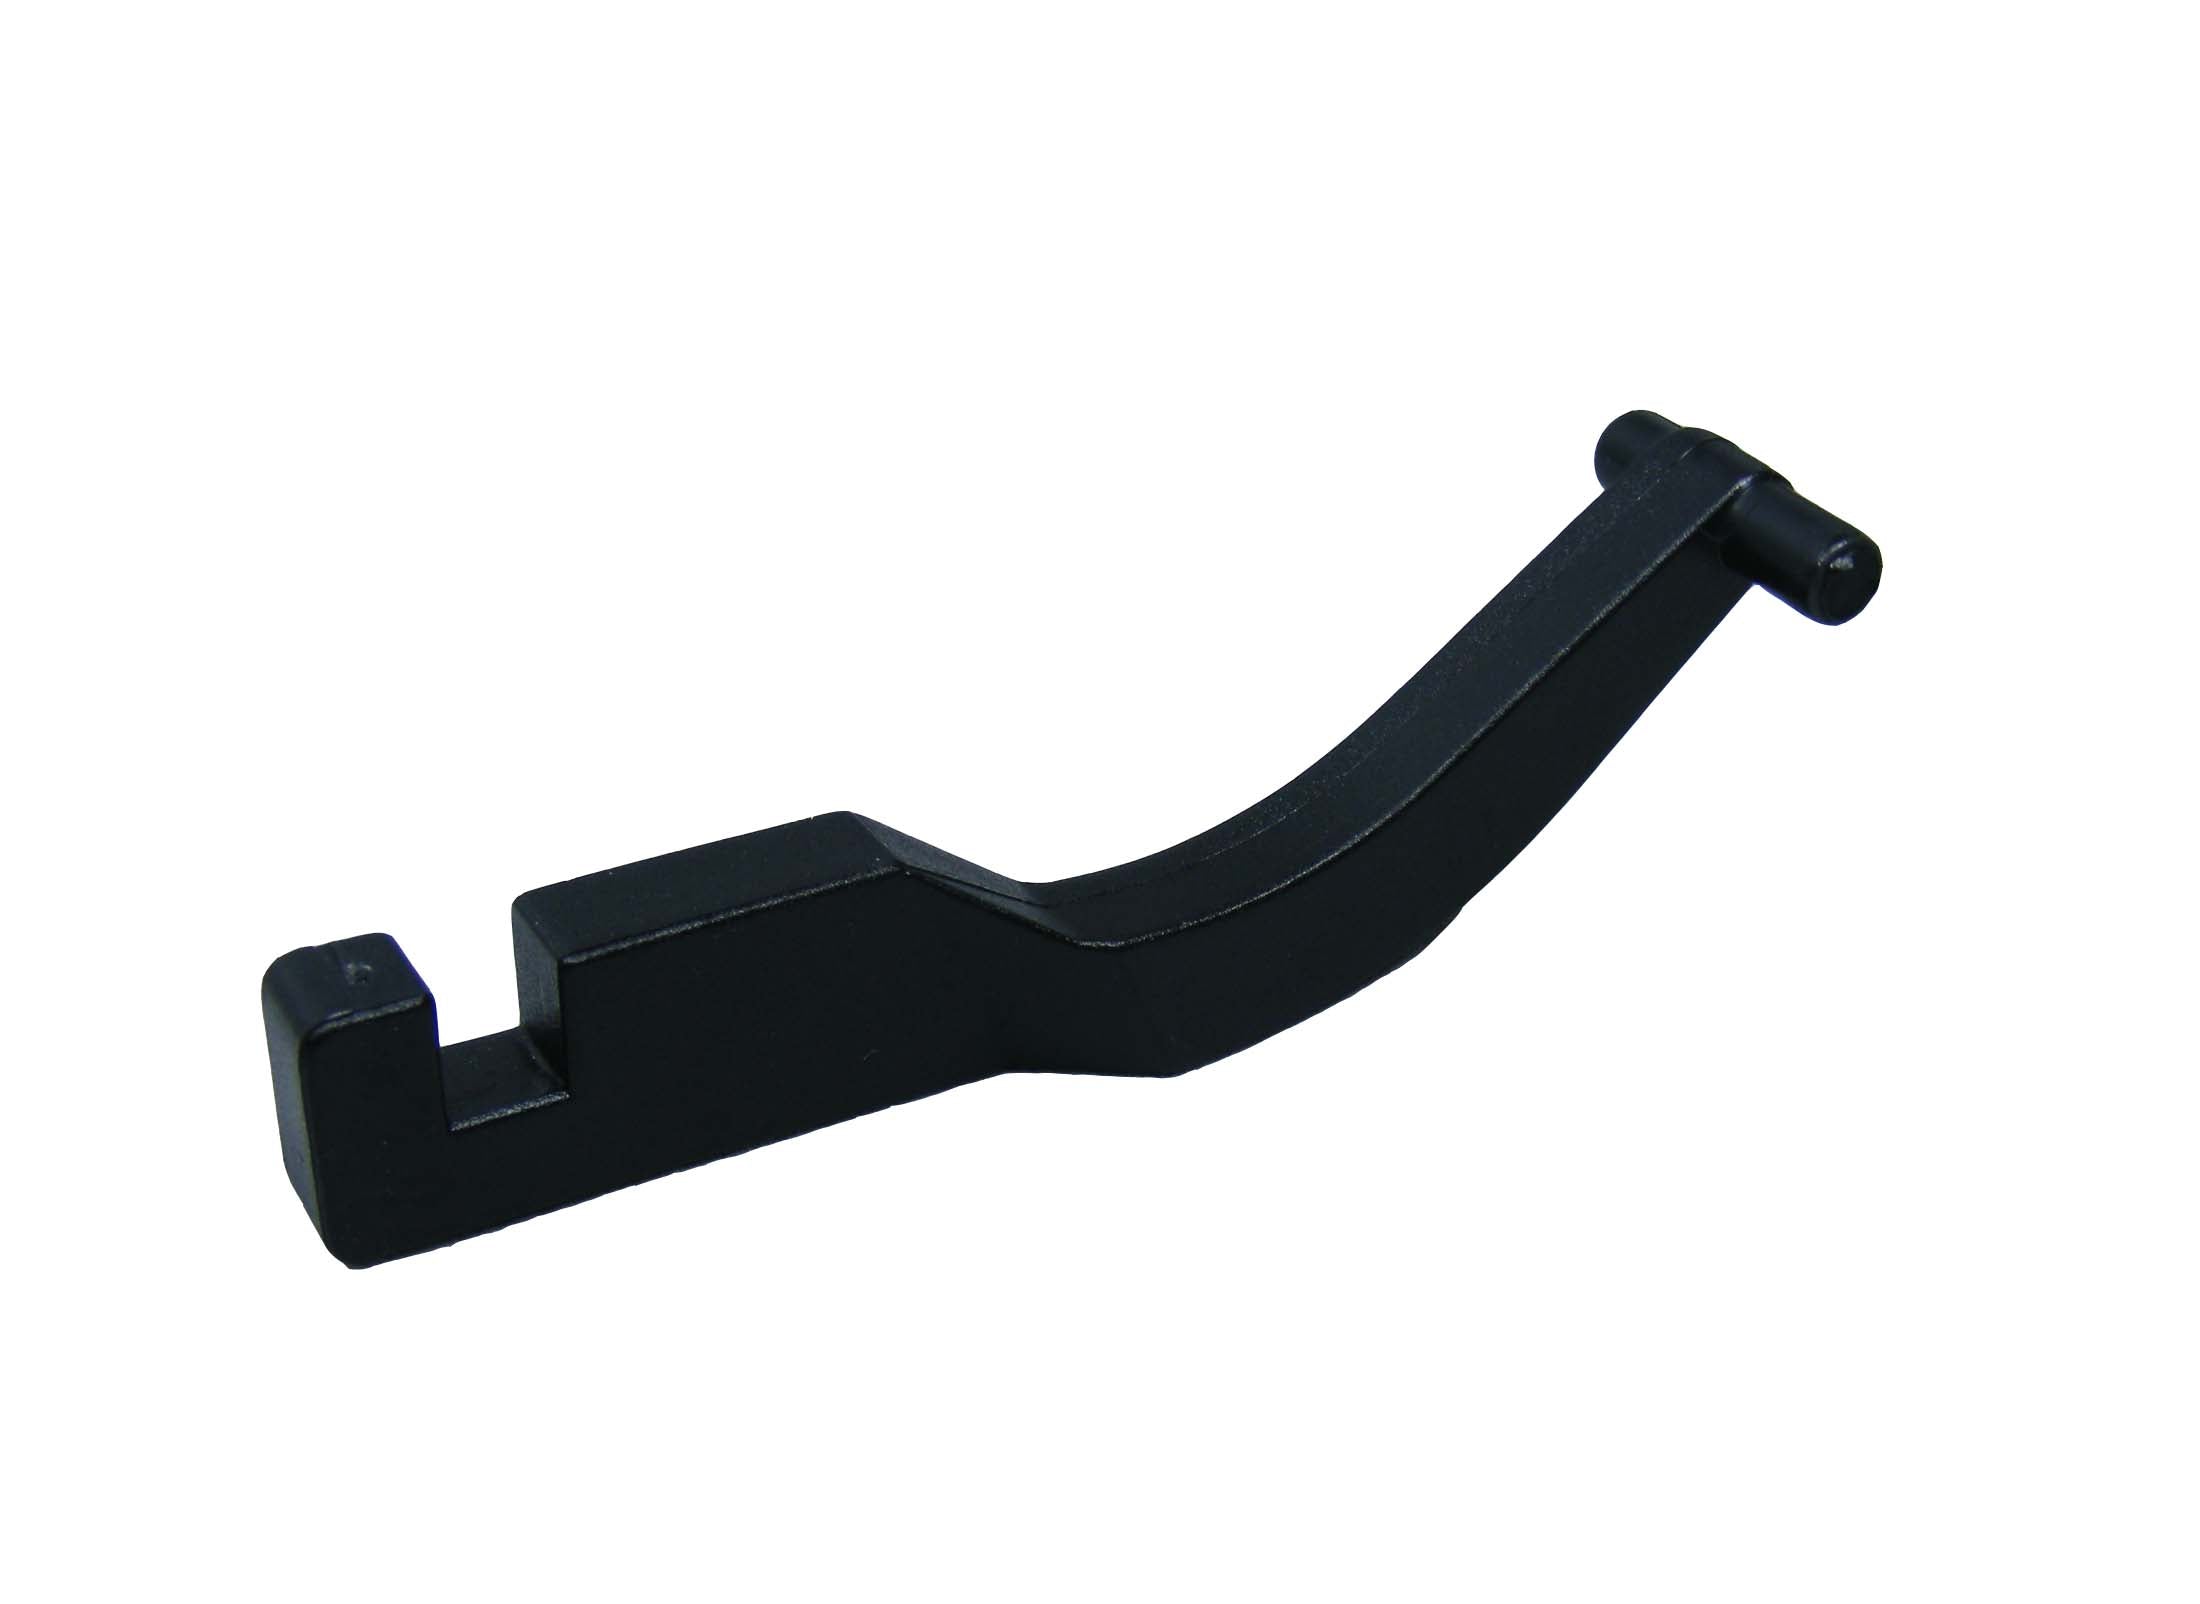 Lindhaus Lhs148-ch380 Ch380 side support lever 001580304